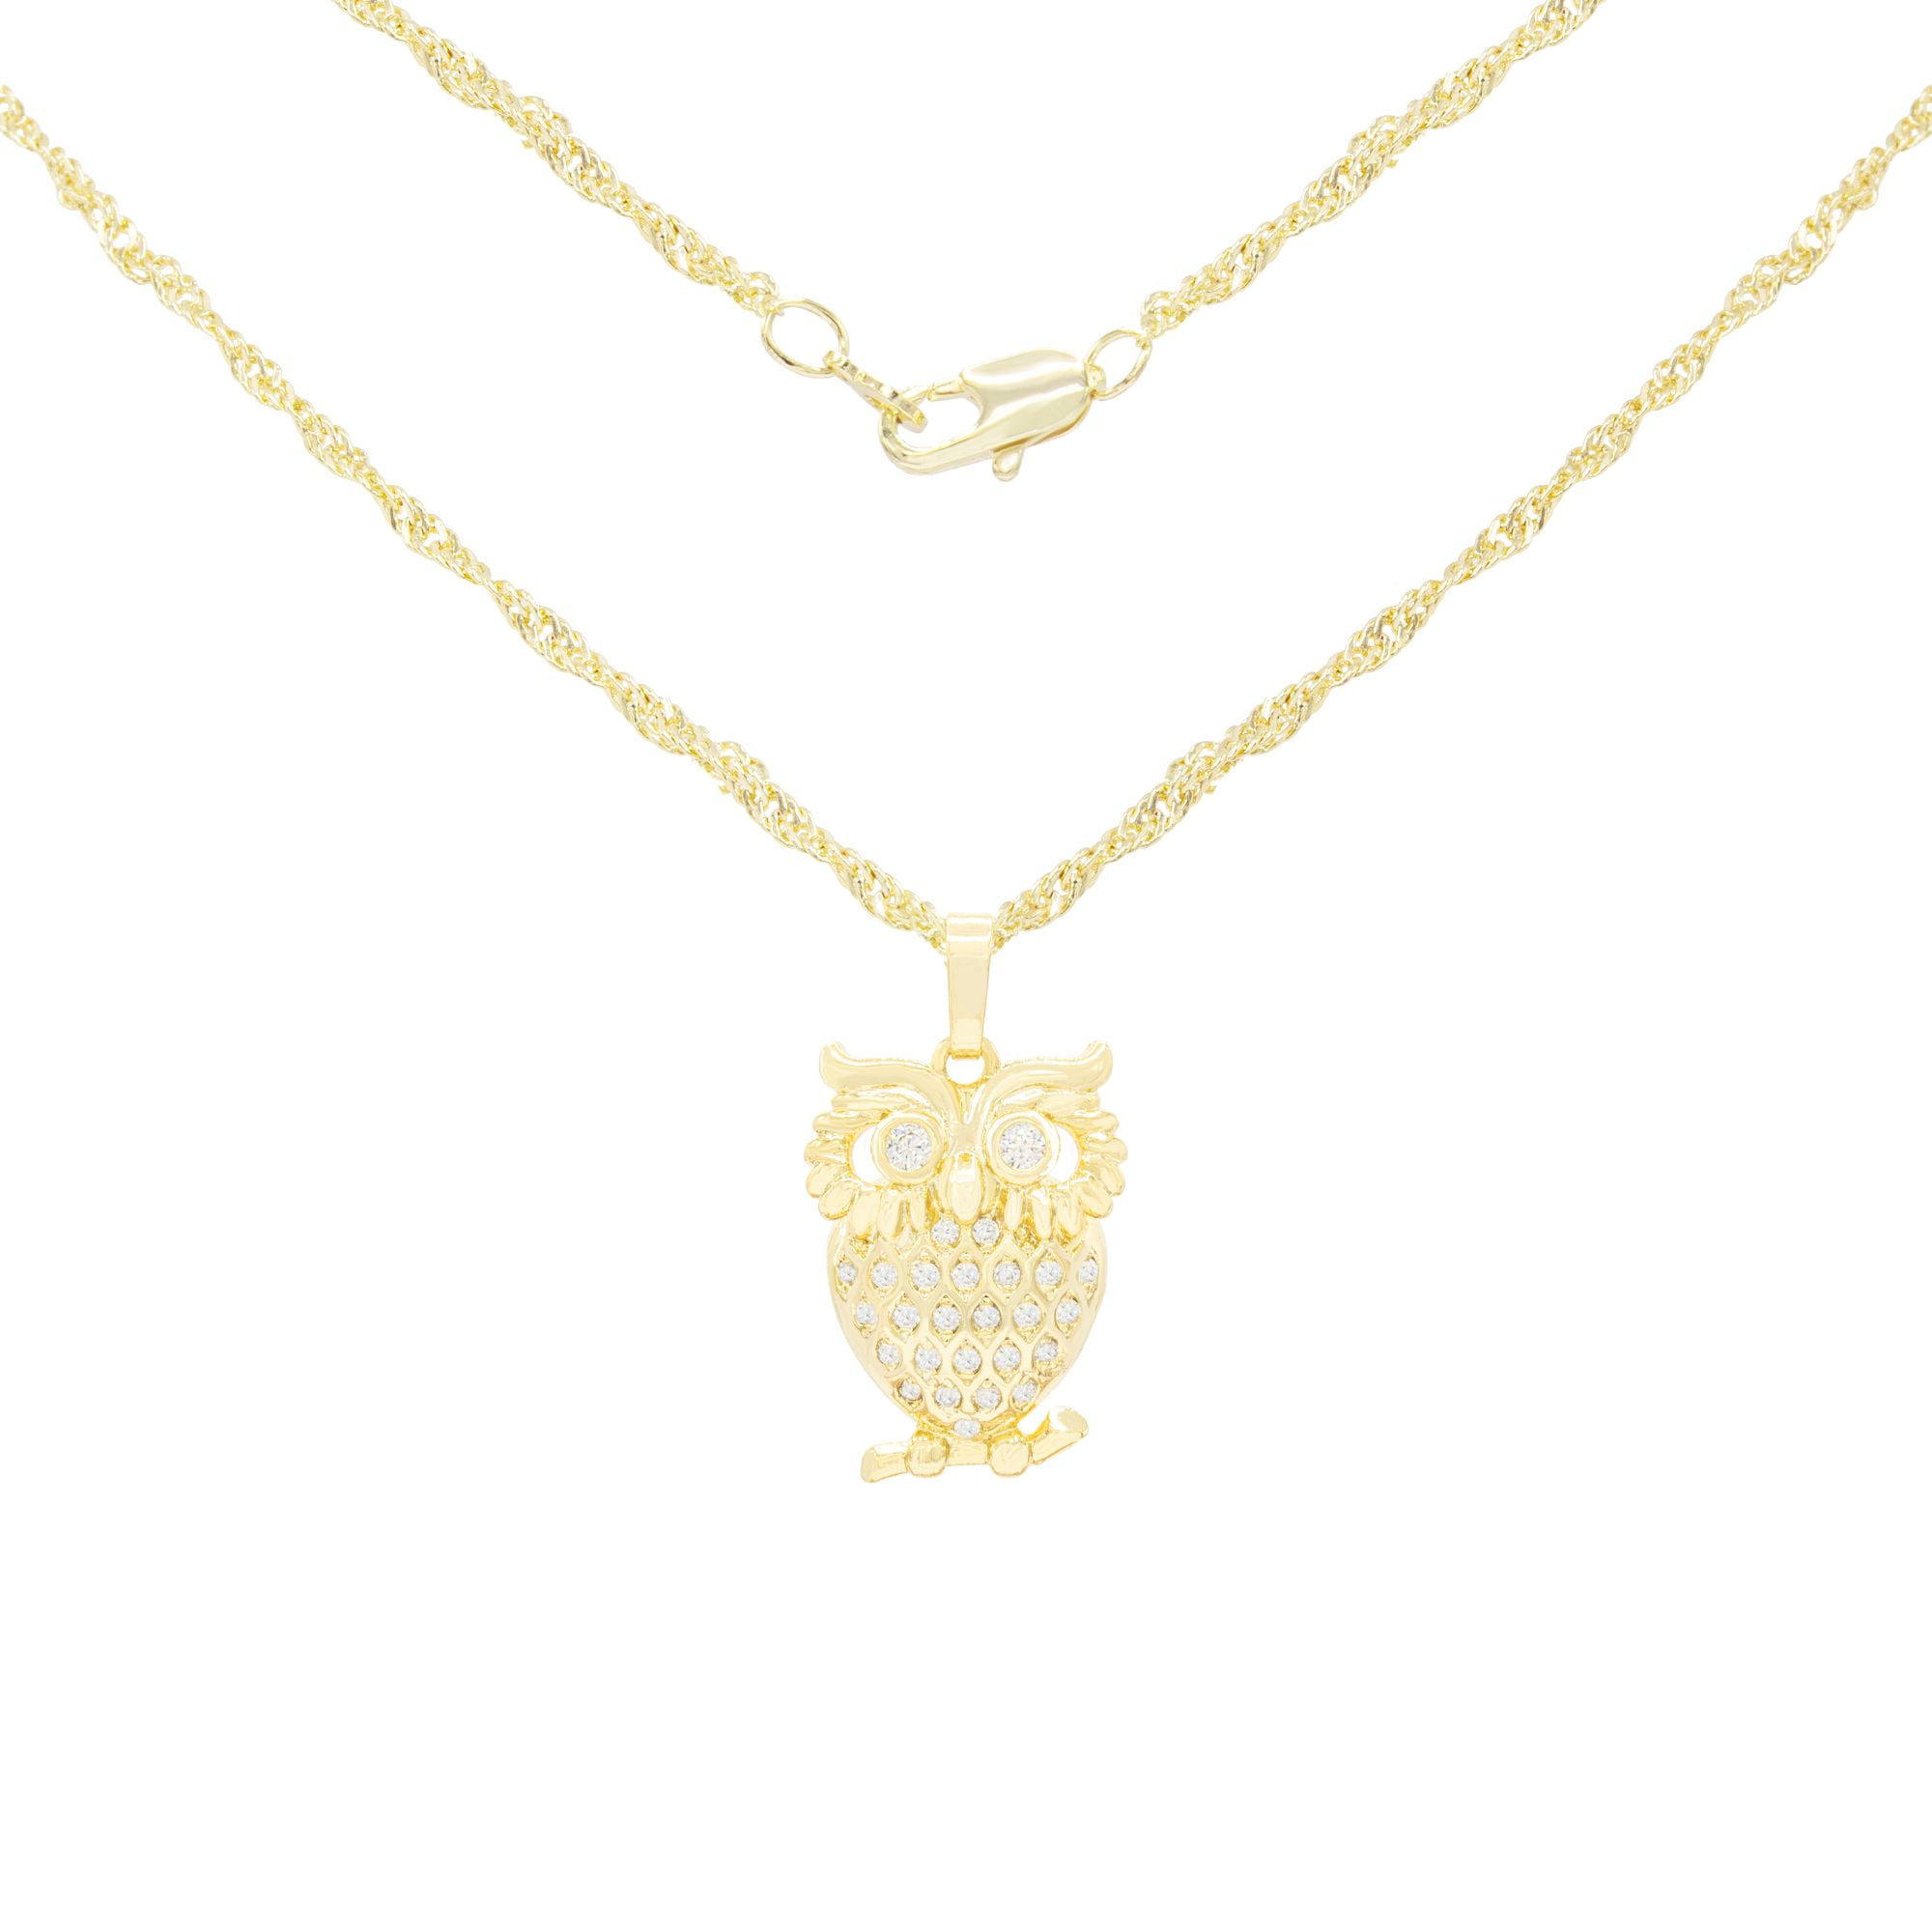 14K Yellow Gold Owl Charm Pendant with 0.8mm Box Chain Necklace